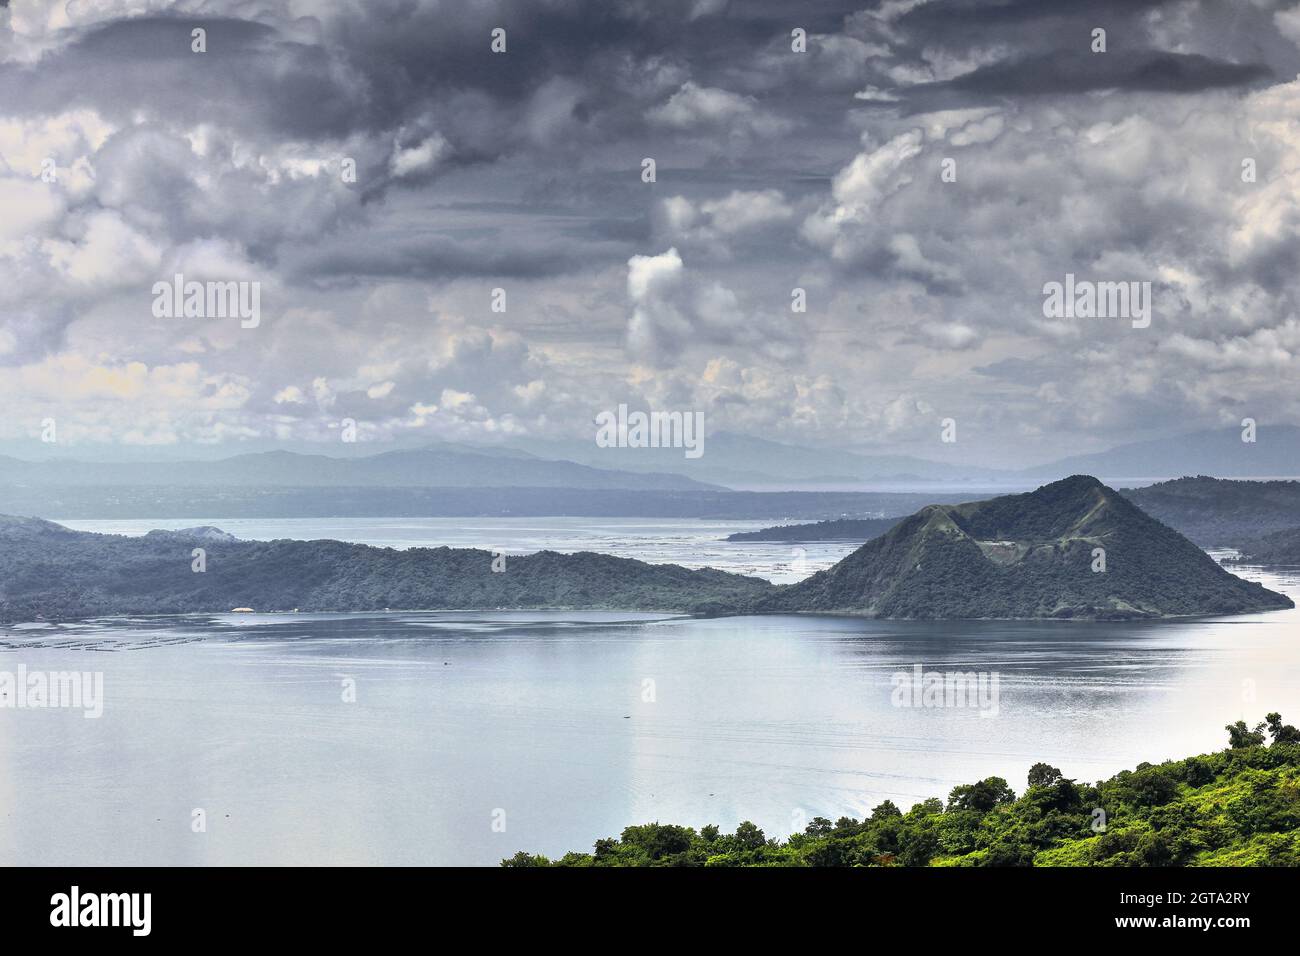 0002 S.wards View-taal Lake And Volcano Isl.from Between Tagaytay And Talisay. Batangas-philippines. Stock Photo